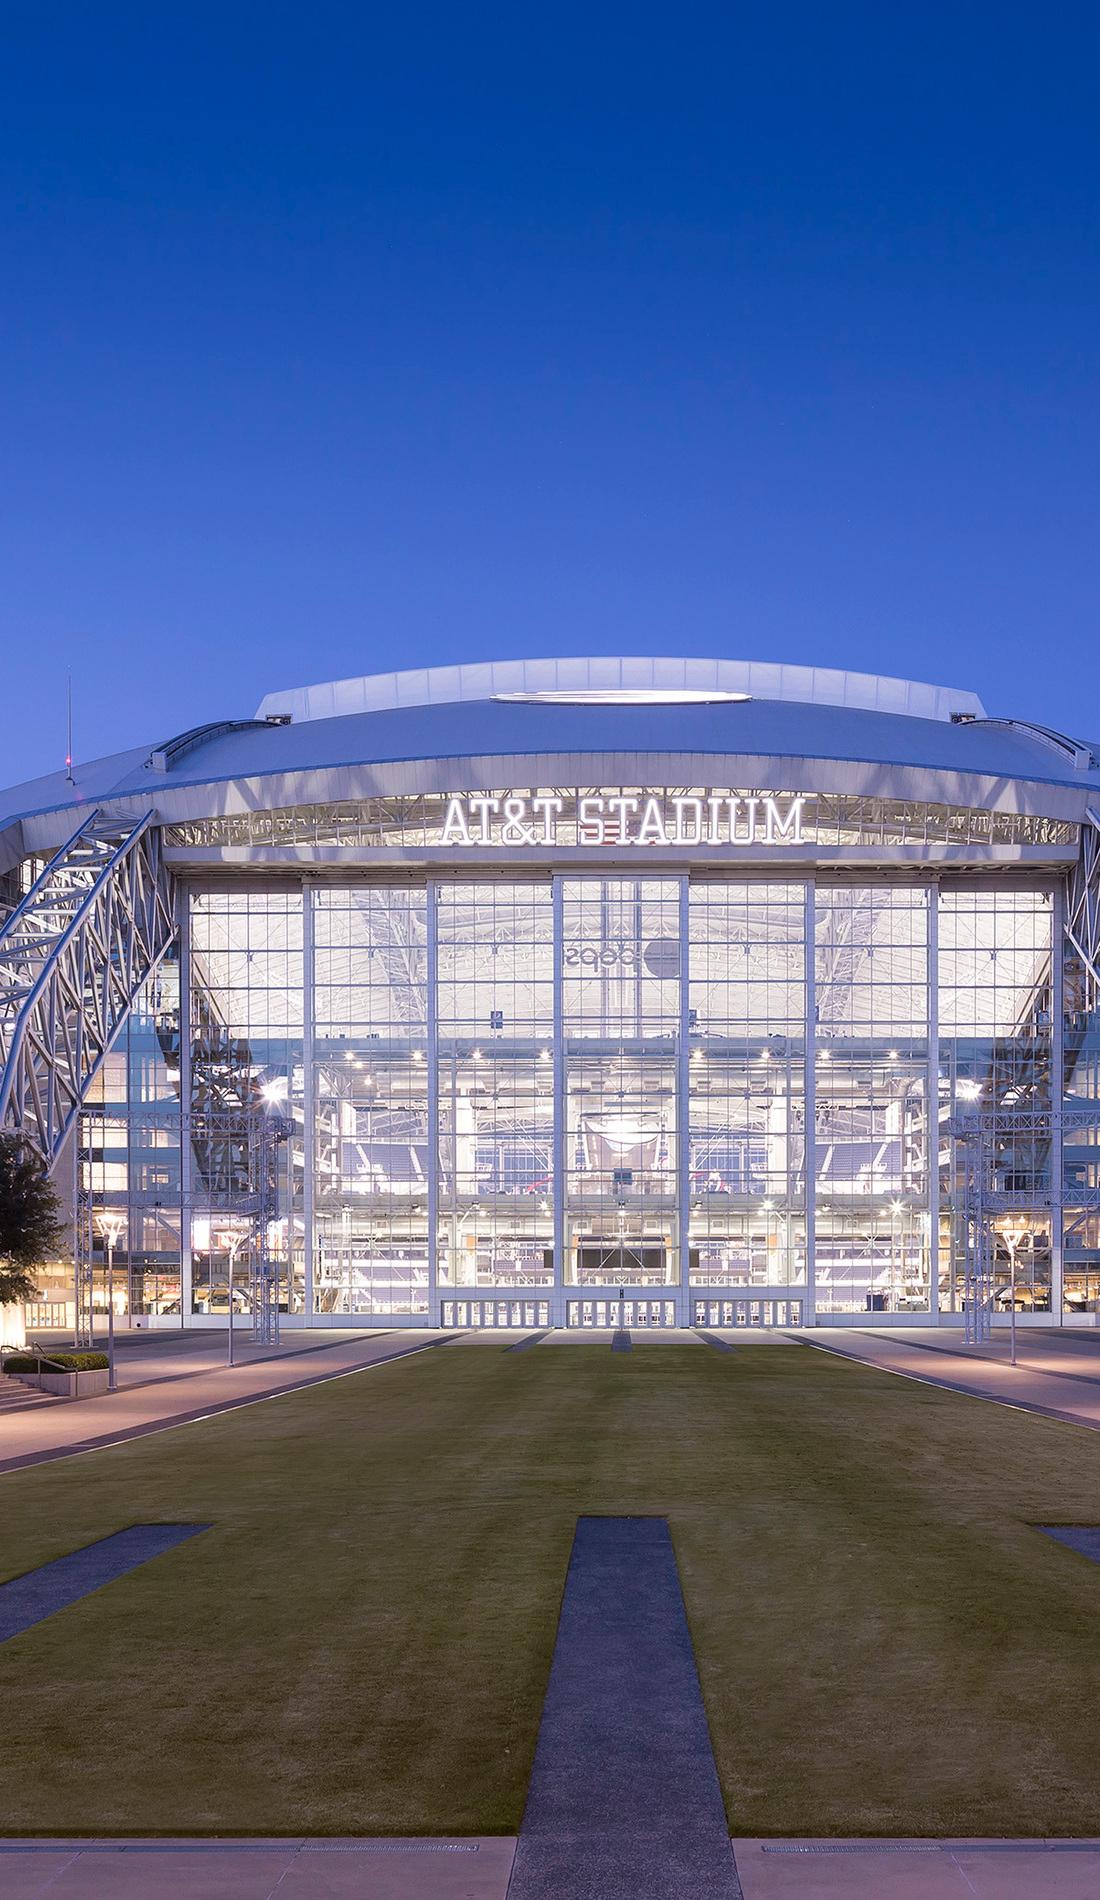 dallas cowboys tickets this weekend